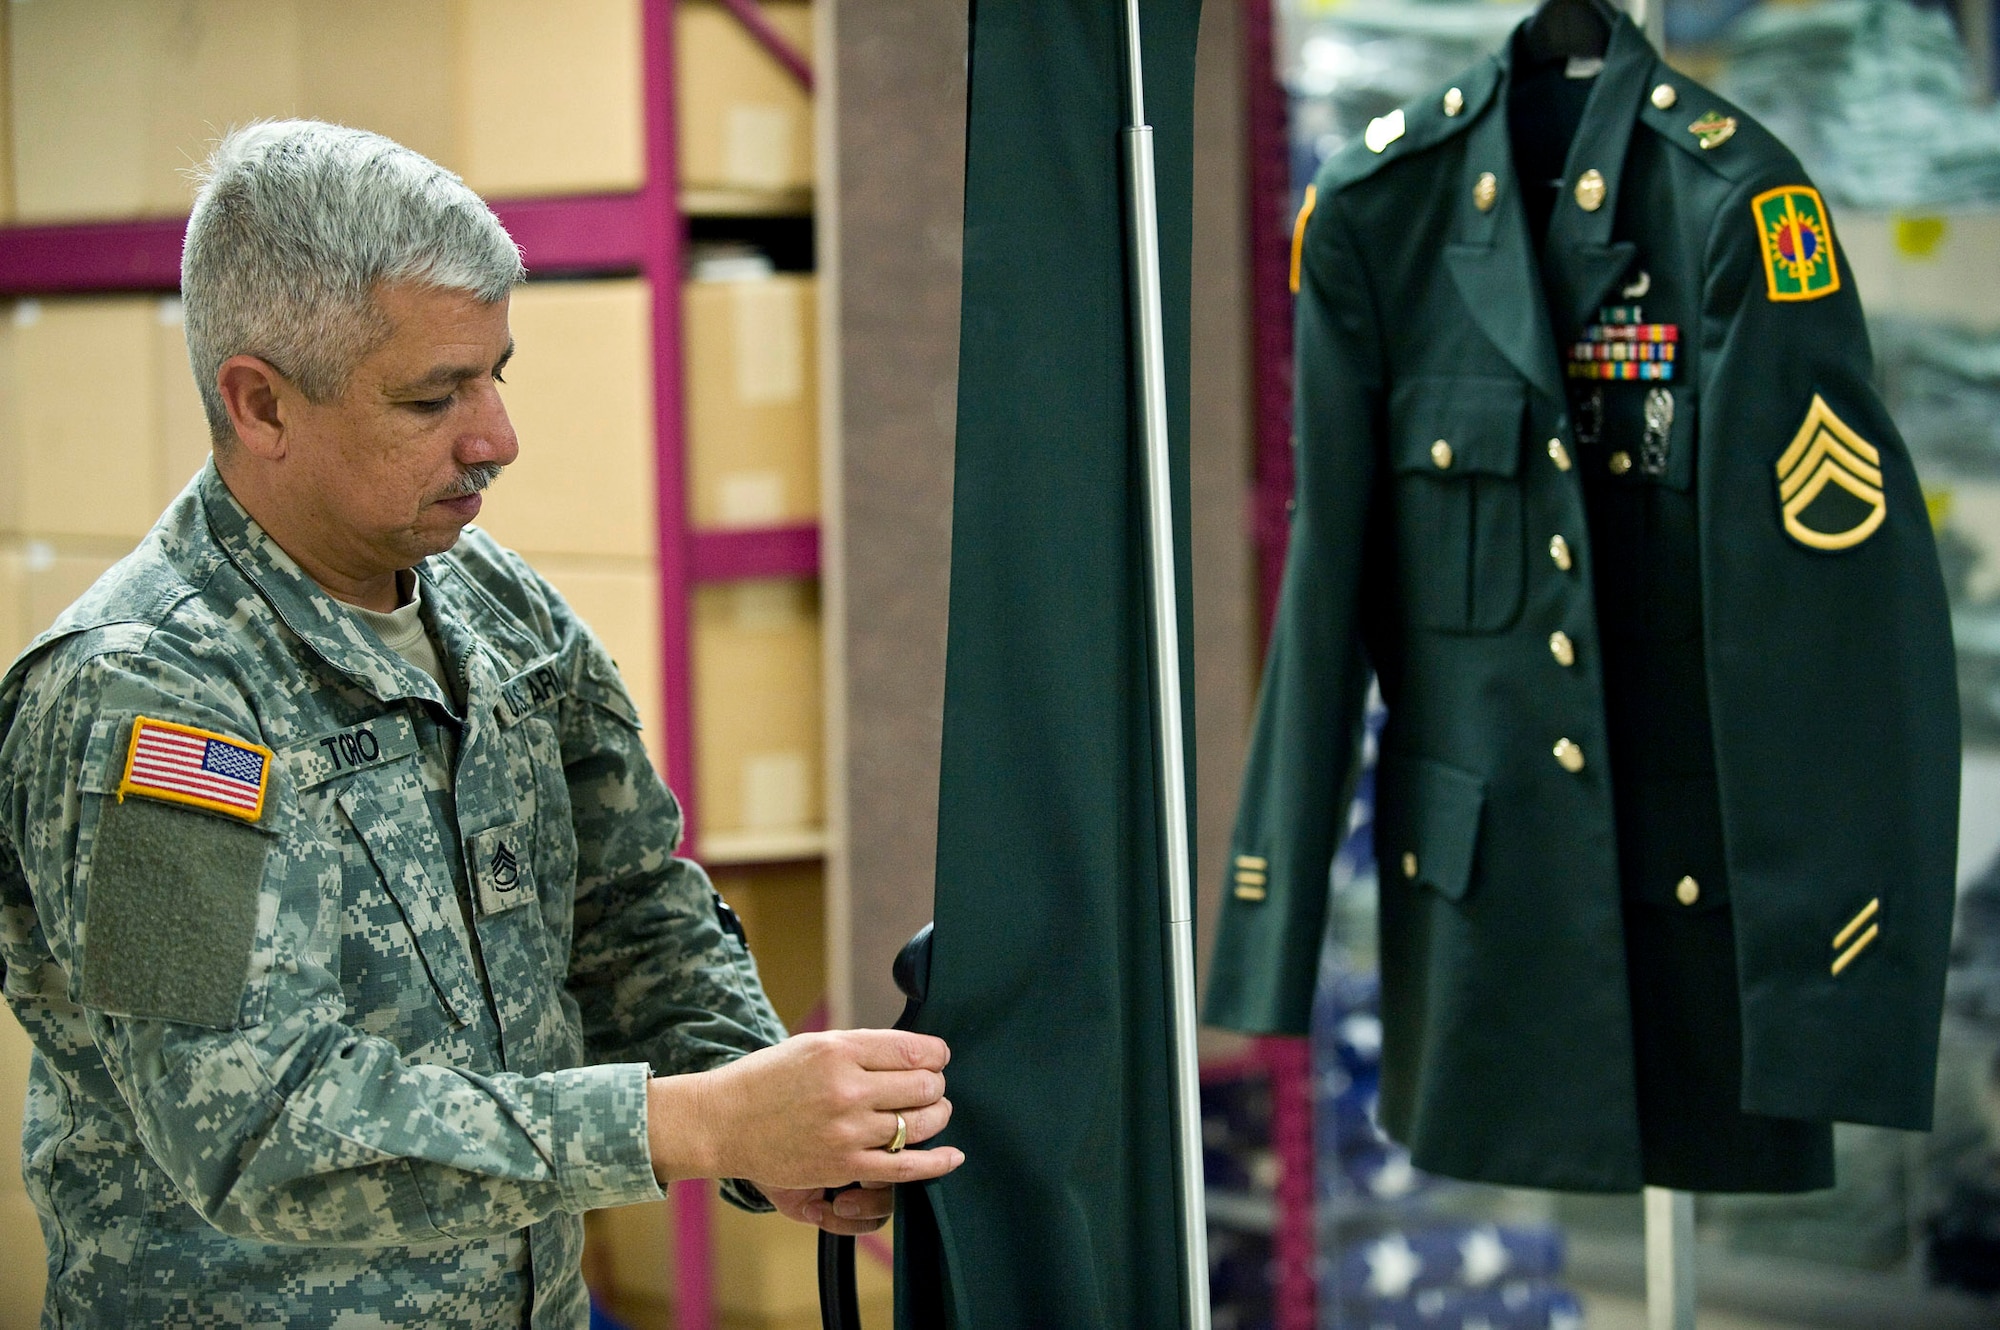 U.S. Army Sergeant First Class Jimmy Toro, a  mortuary affairs specialist, steam cleans the uniform of a fallen solider during preparation of the dignified transfer of remains process March 31. Sgt. Toro is on his third year-long voluntary deployment assisting the Air Force Mortuary Affairs Operations Center at Dover Air Force Base, Del. The servicemembers in the uniform section prepare uniforms for the fallen heroes and work with military escorts for the dignified-transfer-of-remains process.  Sergeant Toro is deployed from the U.S. Army Reserve, 311th Quartermaster Company in Puerto Rico. (U.S. Air Force photo/Staff Sgt. Bennie J. Davis III)